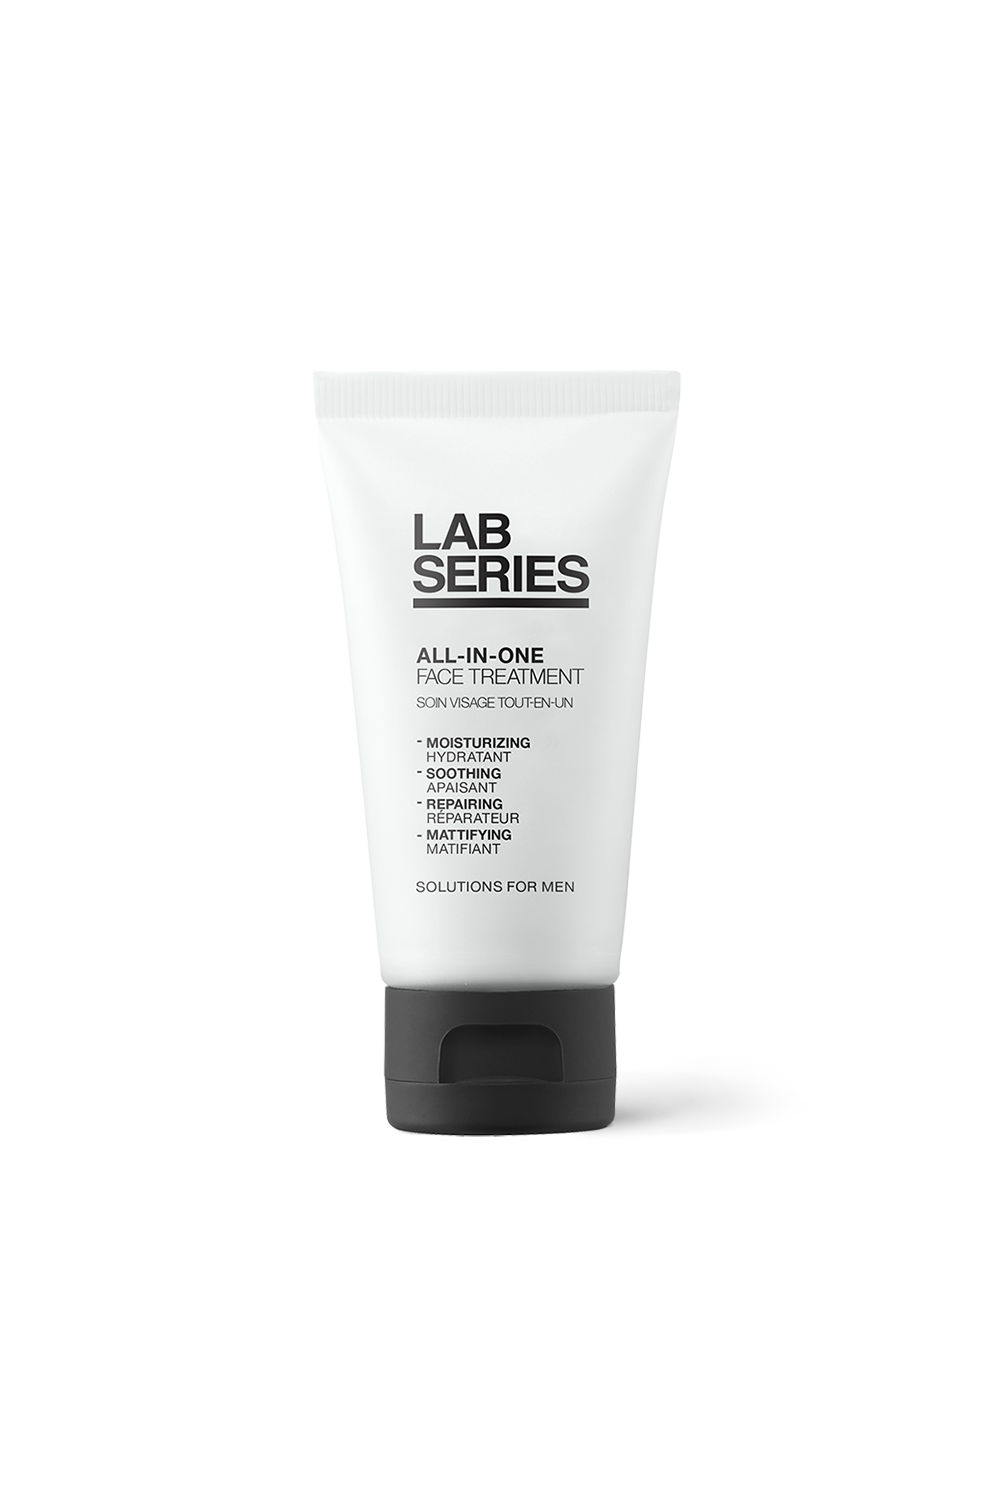 Photos - Cream / Lotion LAB SERIES Face Treatment All-in-one - 50ml PROD91259 